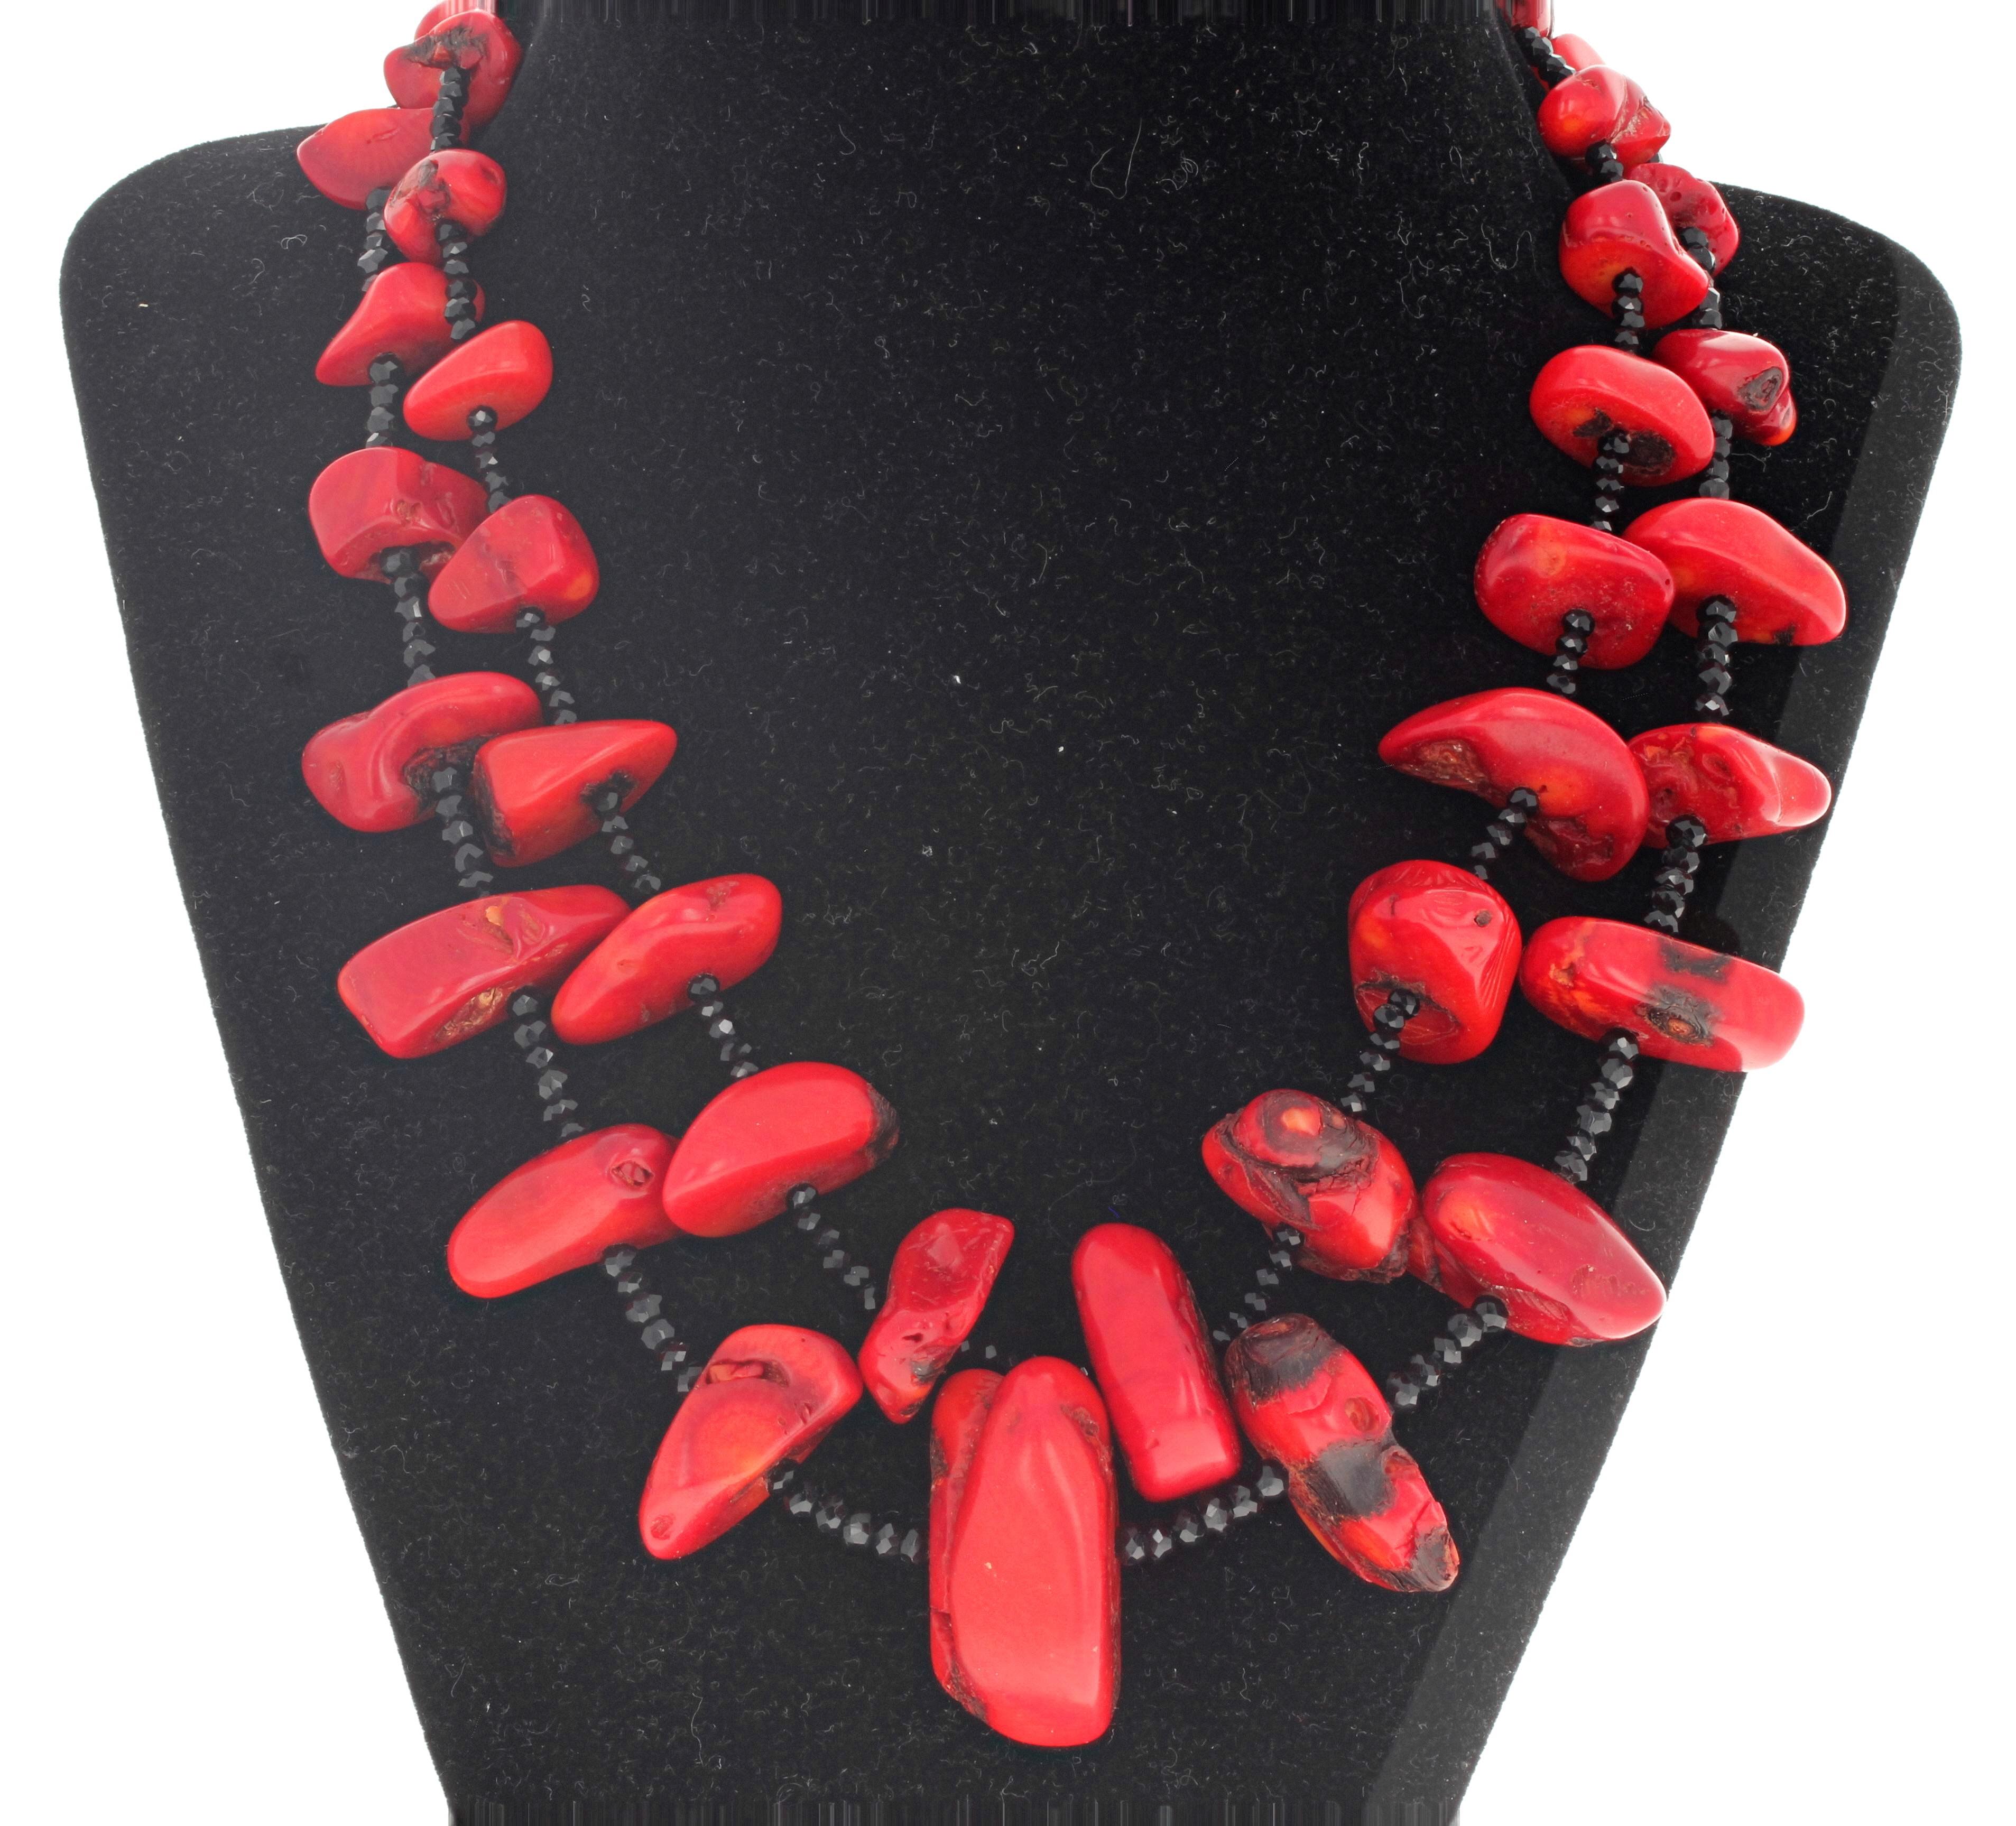 The largest middle natural red Coral in this double strand necklace is 34mm x 16mm.  The glittering gemcut sparkling natural black Onyx are 4mm.  This dramatic fascinating beautiful necklace is 18 inches. long with a gold plated easy to use hook